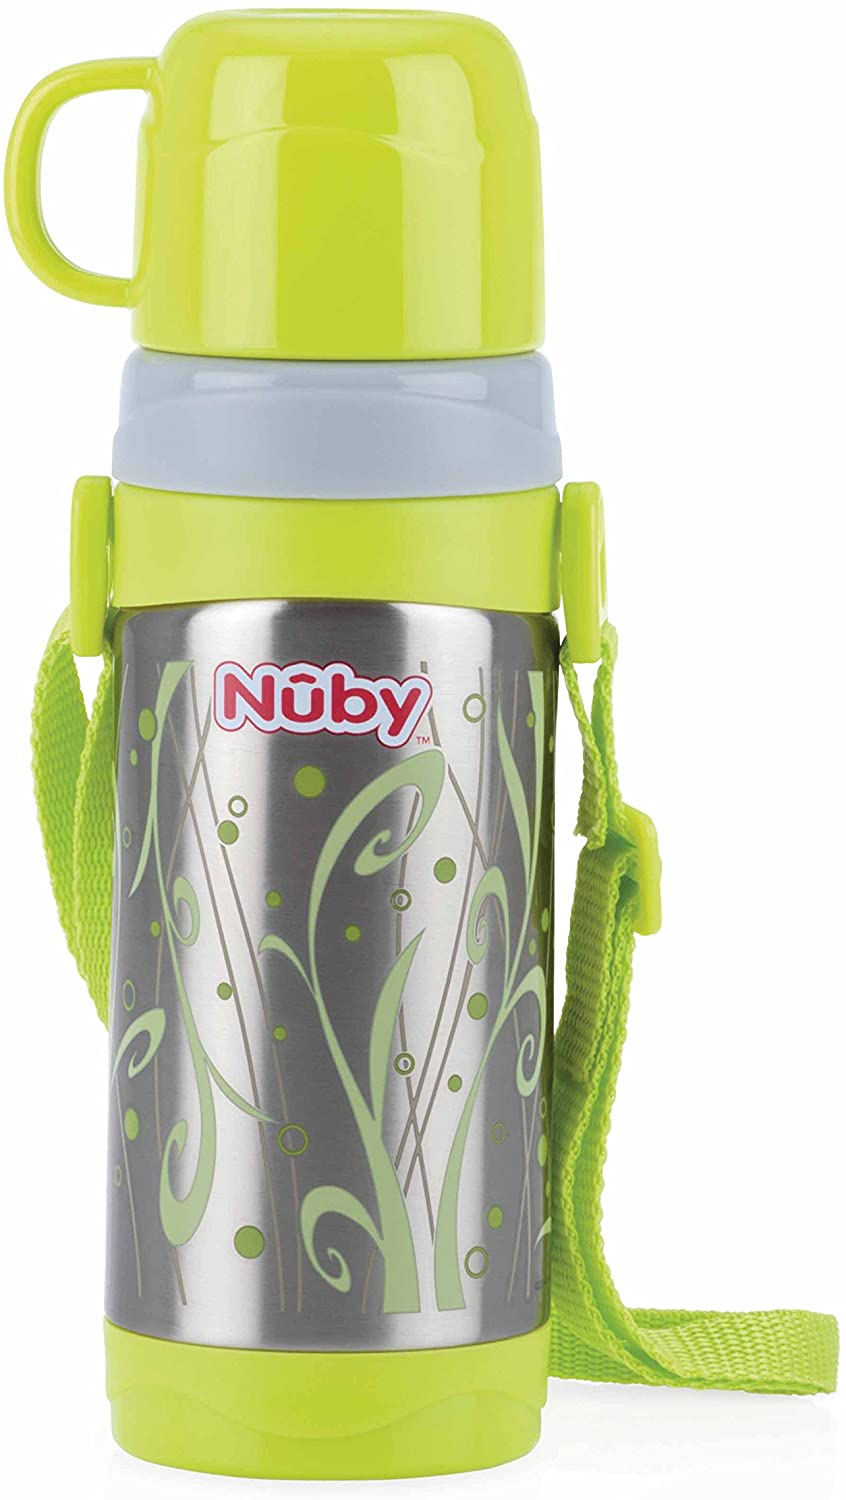 Nuby Insulated Stainless Steel Thermos Flask 4 Years RRP £19.99 CLEARANCE XL £12.99